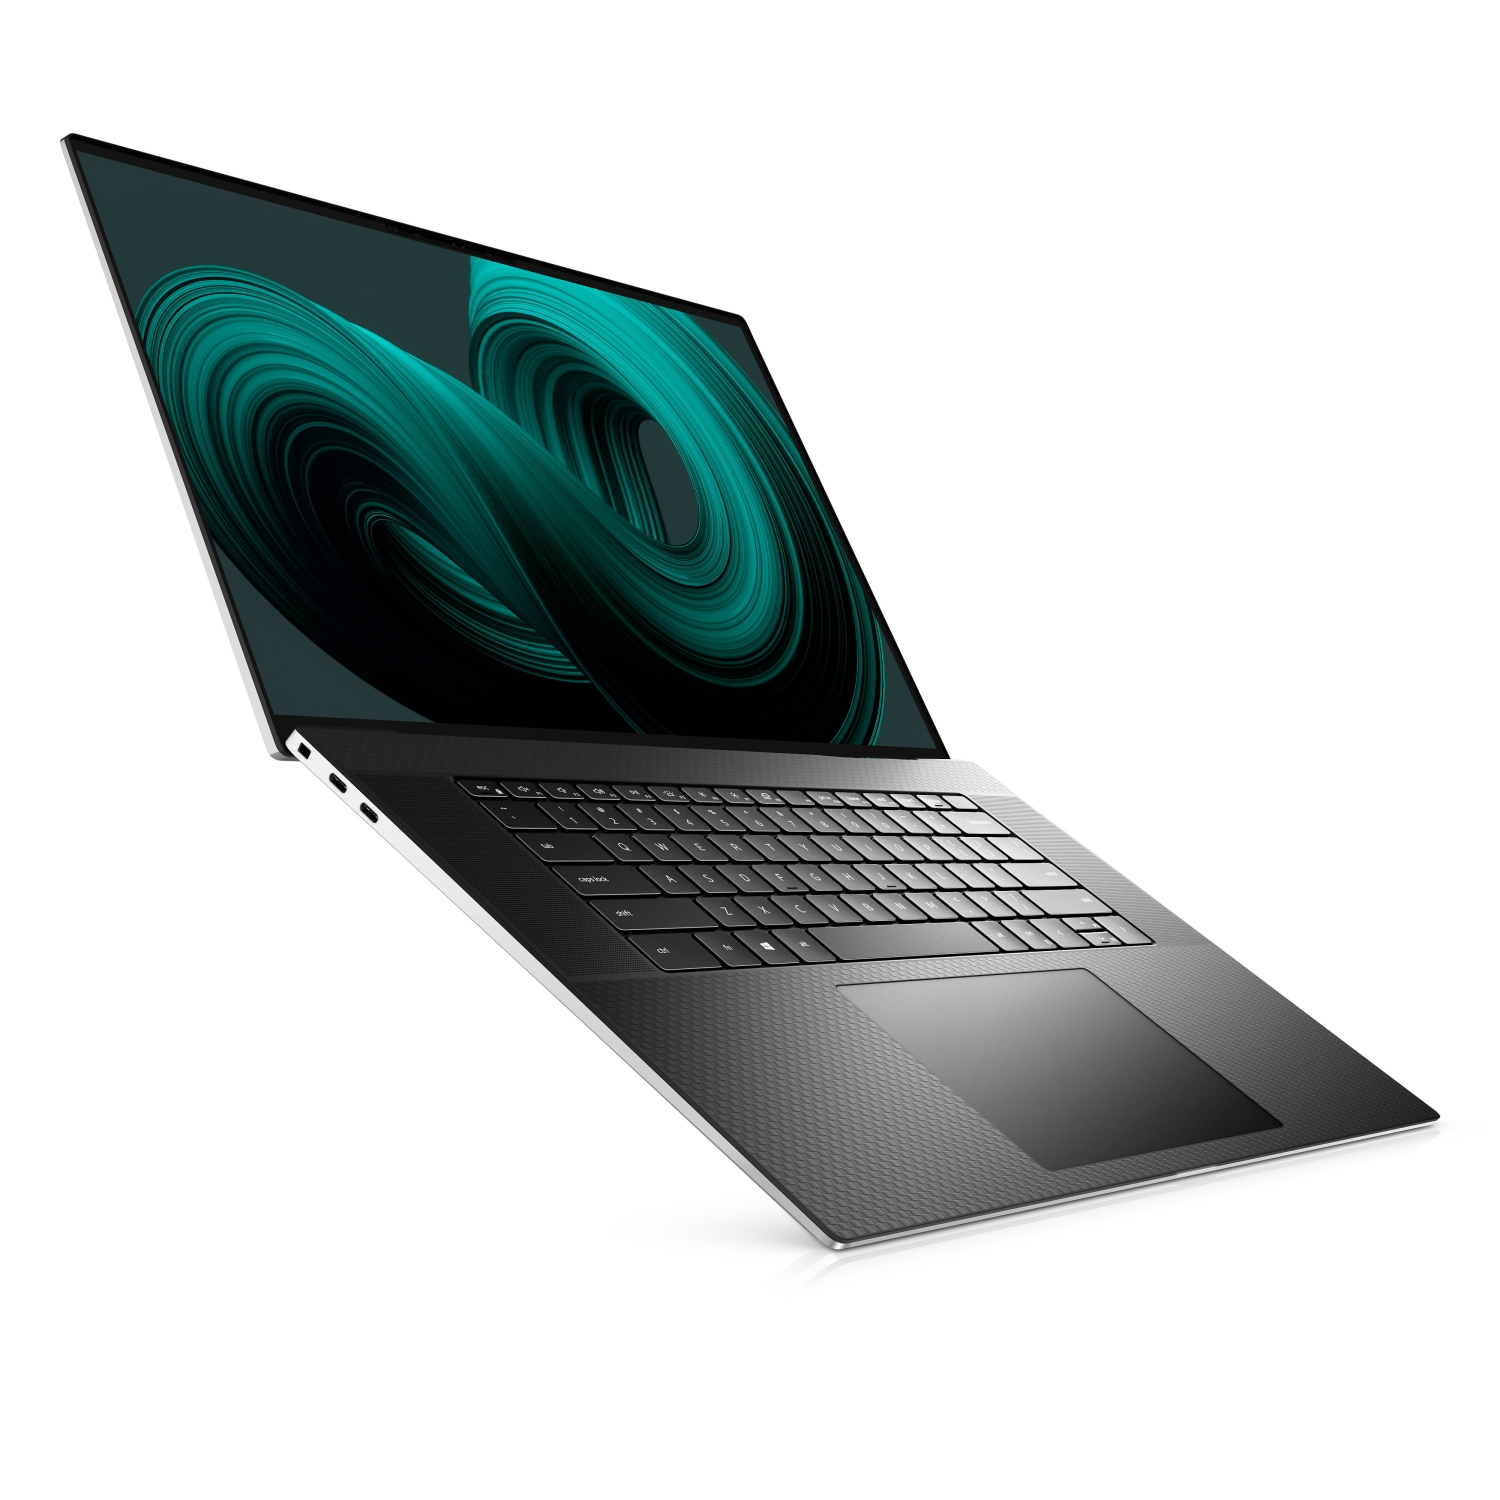 Refurbished (Excellent) – Dell XPS 9710 Laptop (2021) | 17" FHD+ | Core i7 - 1TB SSD - 32GB RAM | 8 Cores @ 4.6 GHz - 11th Gen CPU